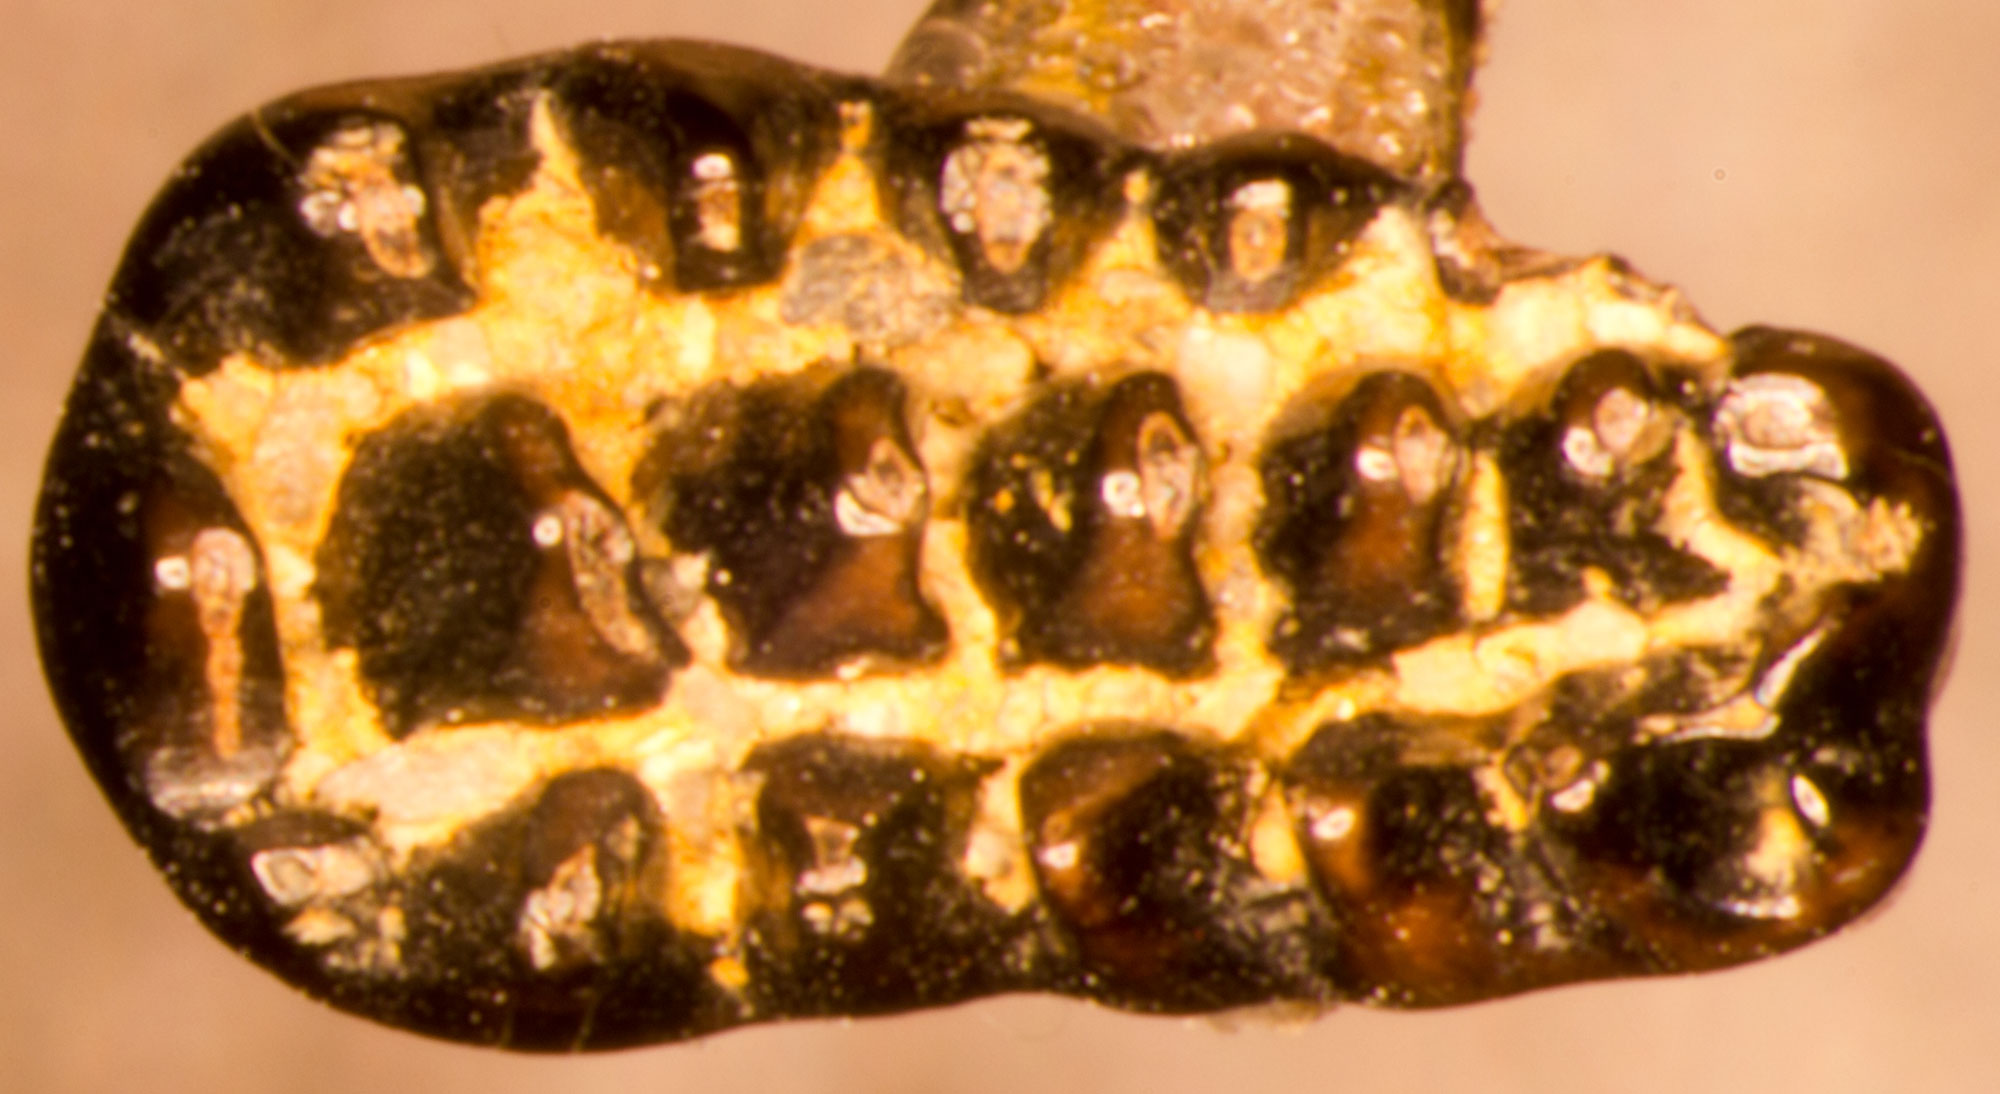 Photograph of the tooth of a multituberculate, a type of mammal, from the Jurassic Morrison Formation of Wyoming. The photo shows the biting surface (cusps) of an oblong tooth. The tooth has about five rows of cusps and is black in color. It appears to be mounted on a think strip of metal.